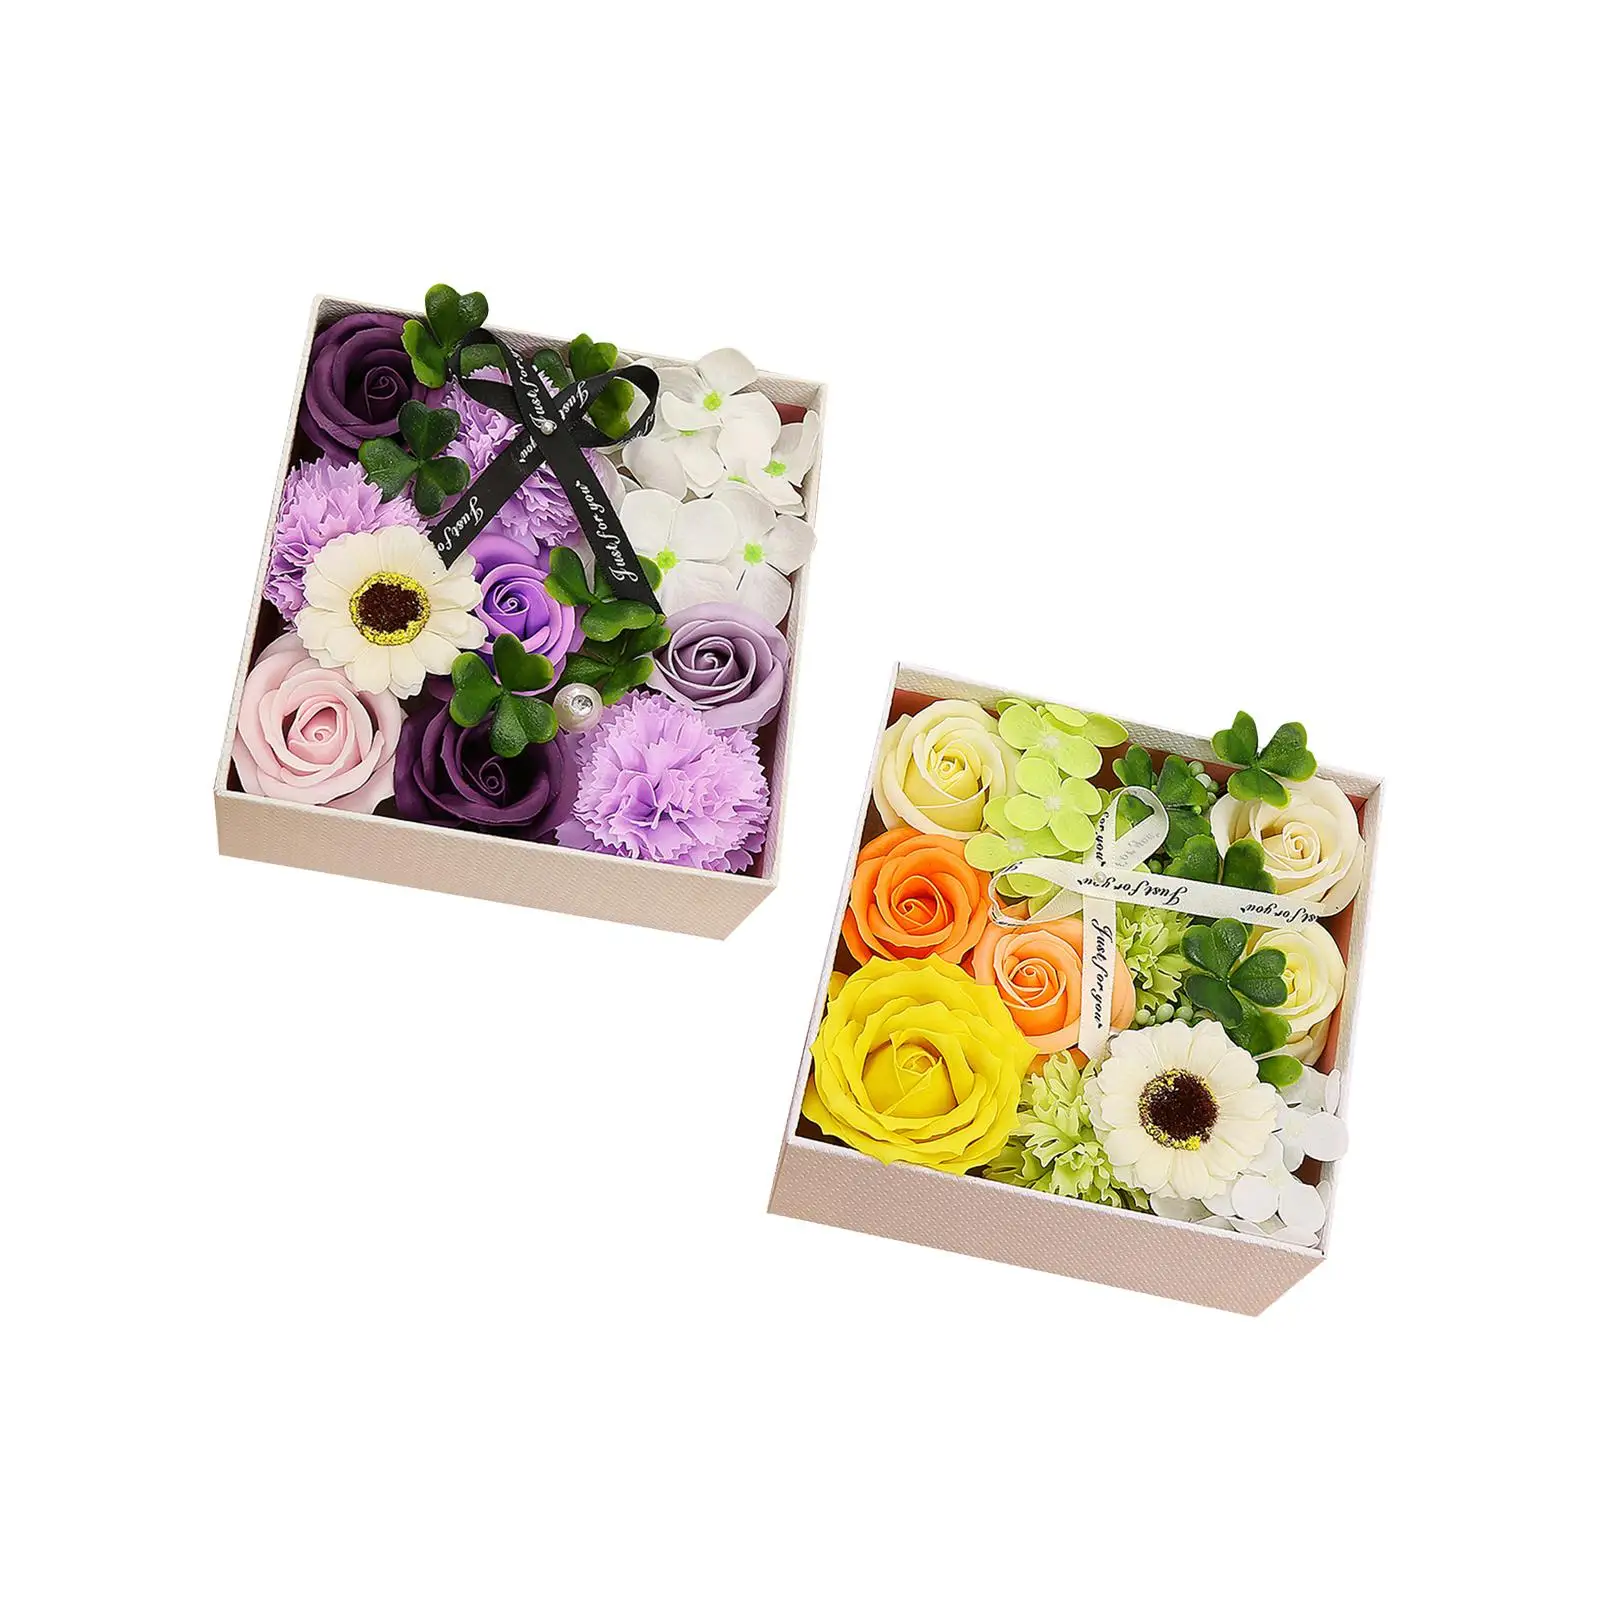 

Soap Flower Bath Decorative Soap in Gift Box Valentine's Day Gift for Mother Wife Girlfriends Lover Mother’S Day Teachers' Day